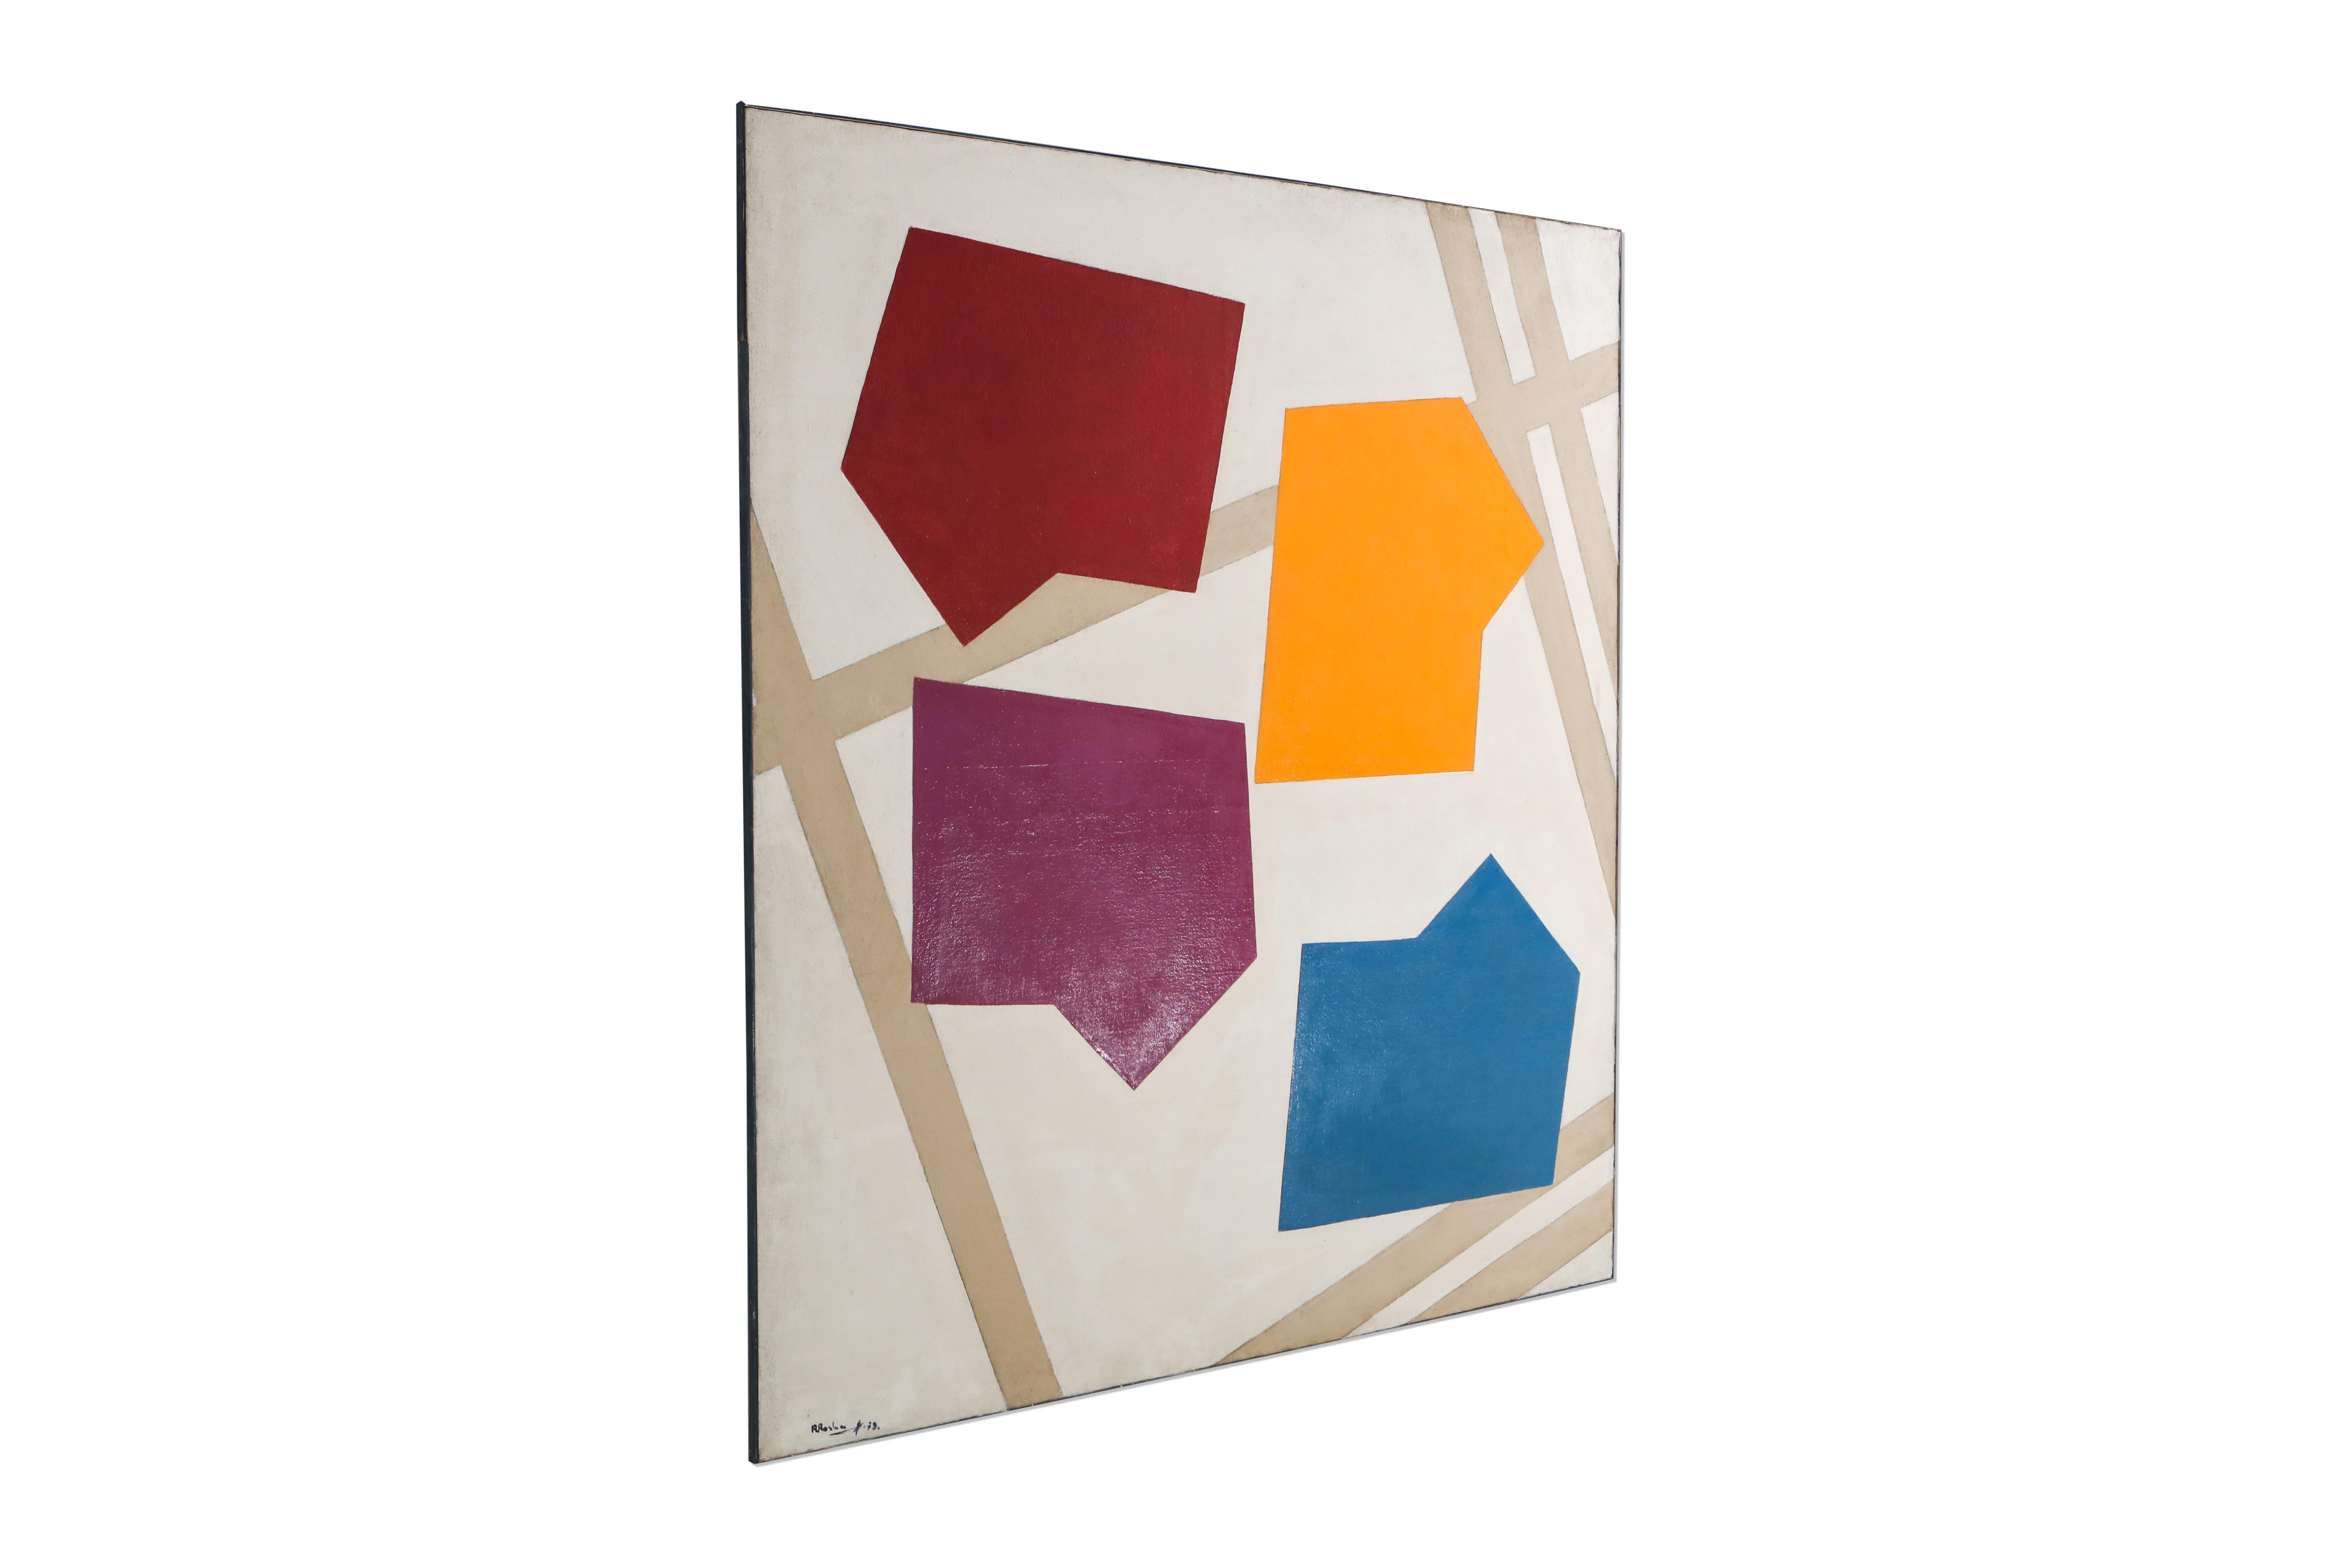 European, Contemporary Abstract Painting by René Roche on Canvas, Late 20th Century

Painting by René Roche, 1979, contemporary painting, post-war artwork, graphic artwork.
Exhibited in the exhibition 'Espace et abstraction' in Palais Saint-Jean in